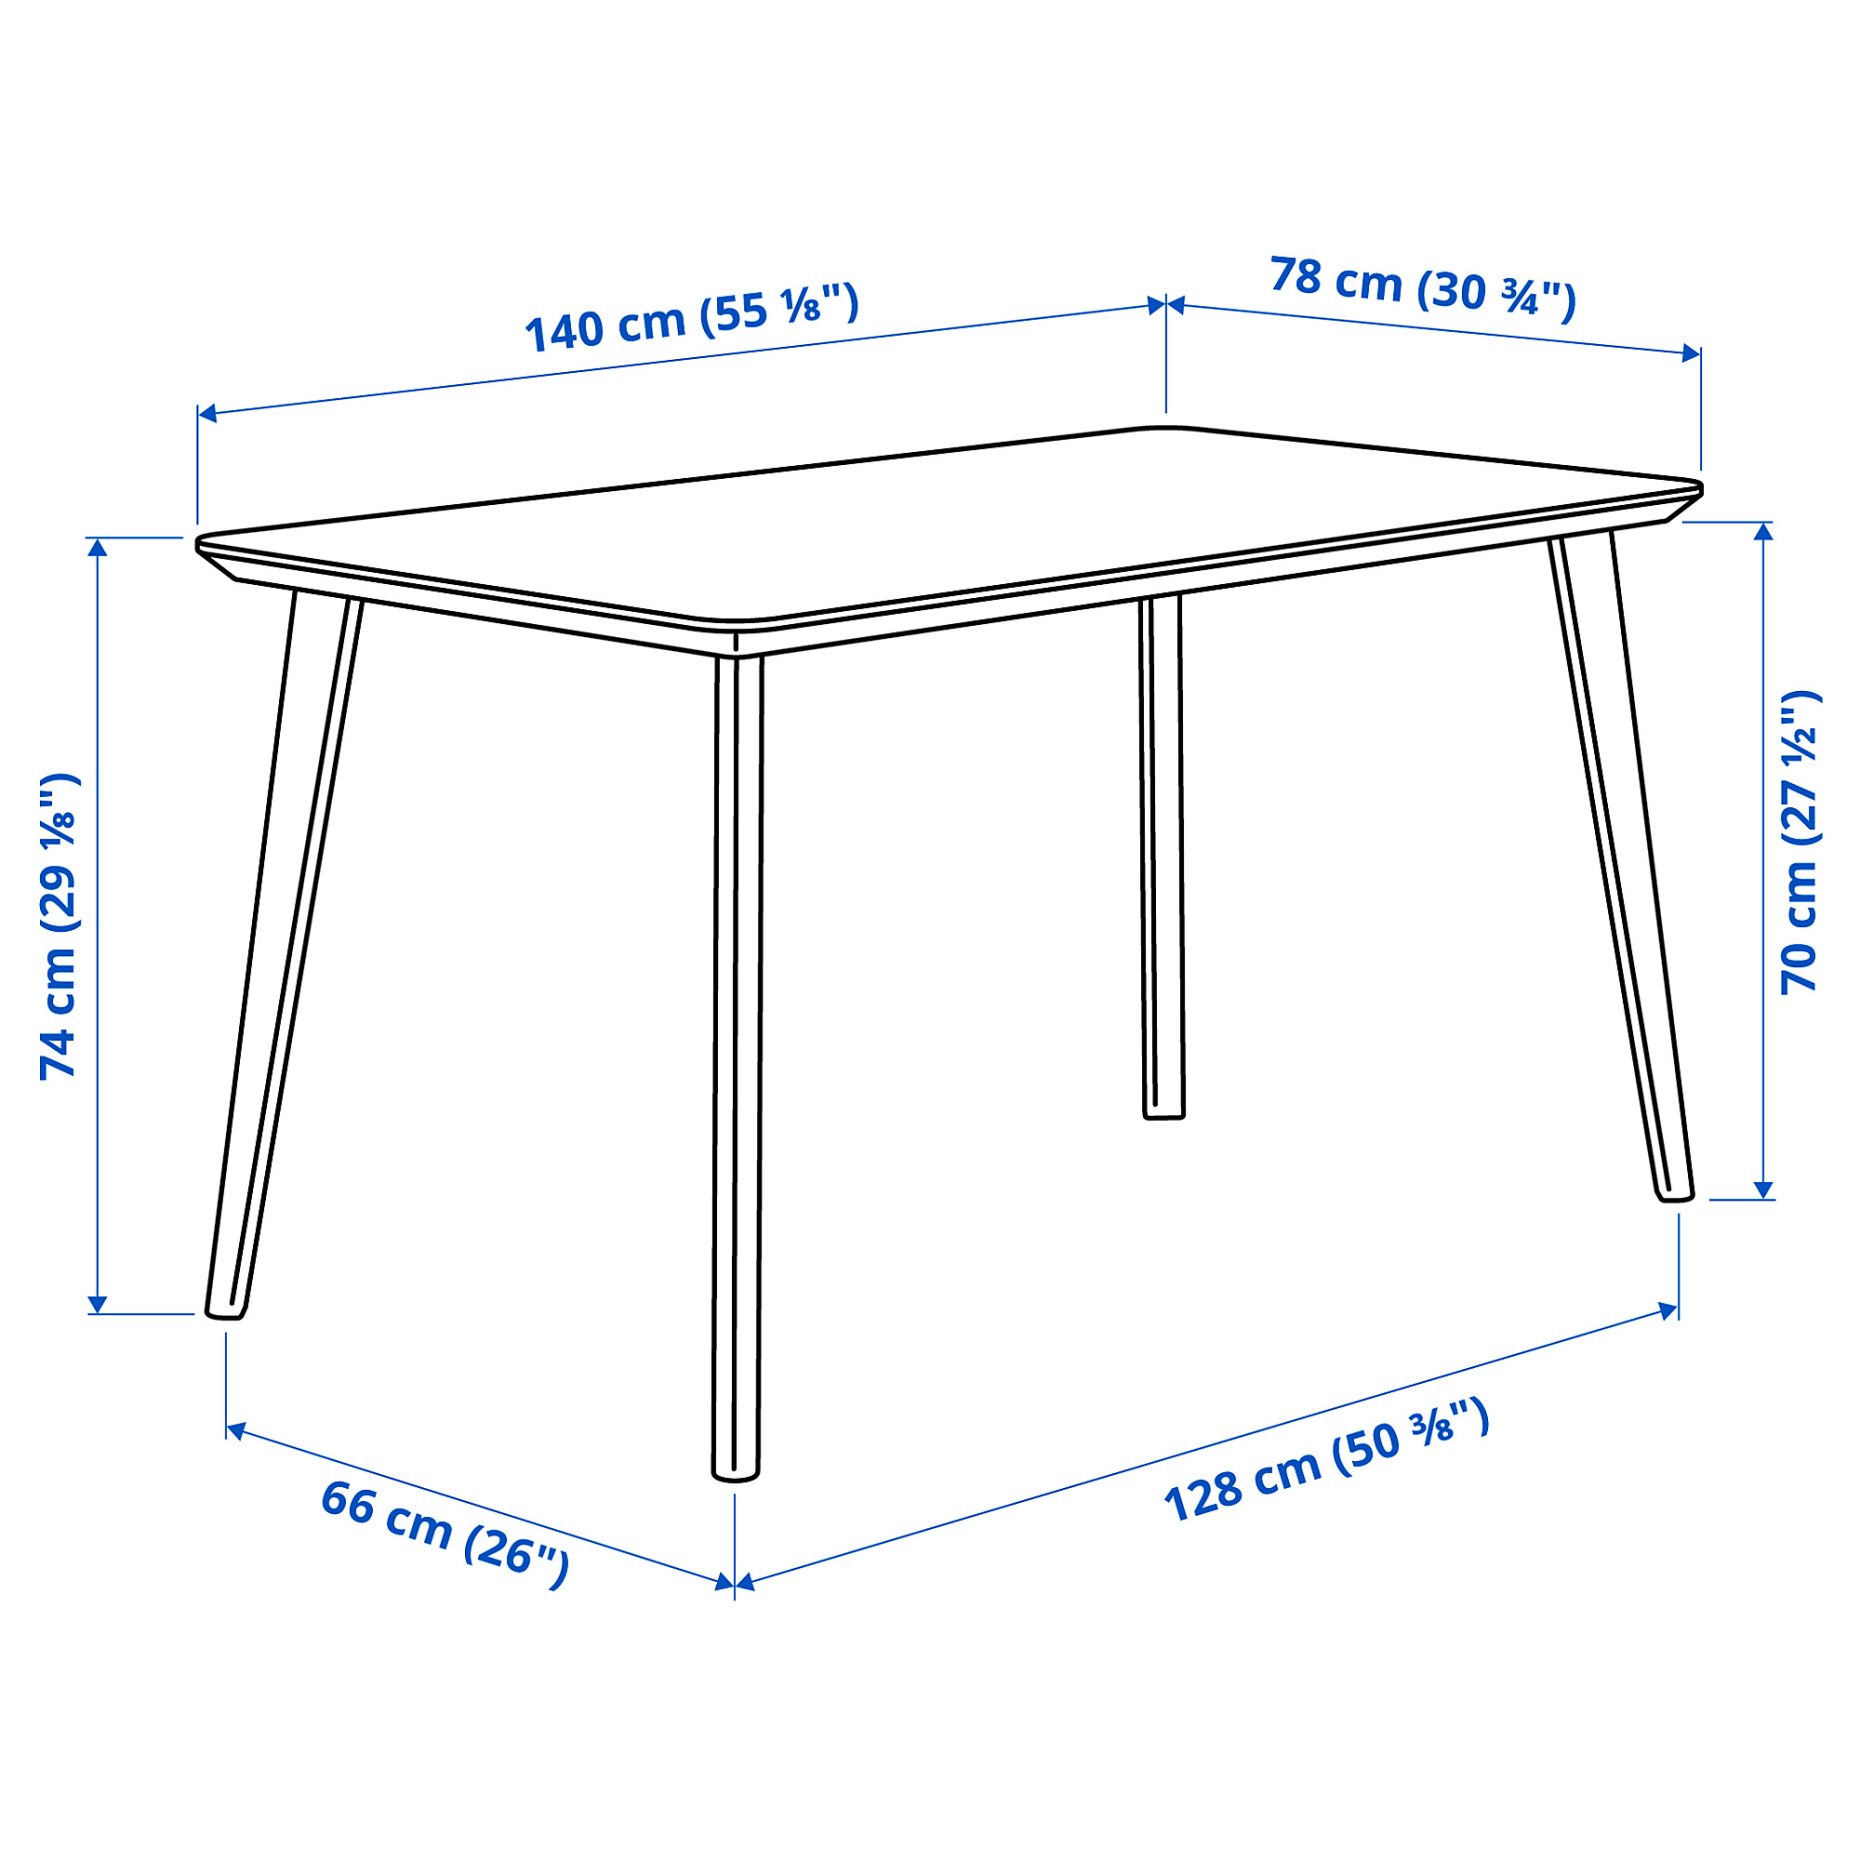 LISABO/KRYLBO, table and 4 chairs, 140 cm, 095.355.40